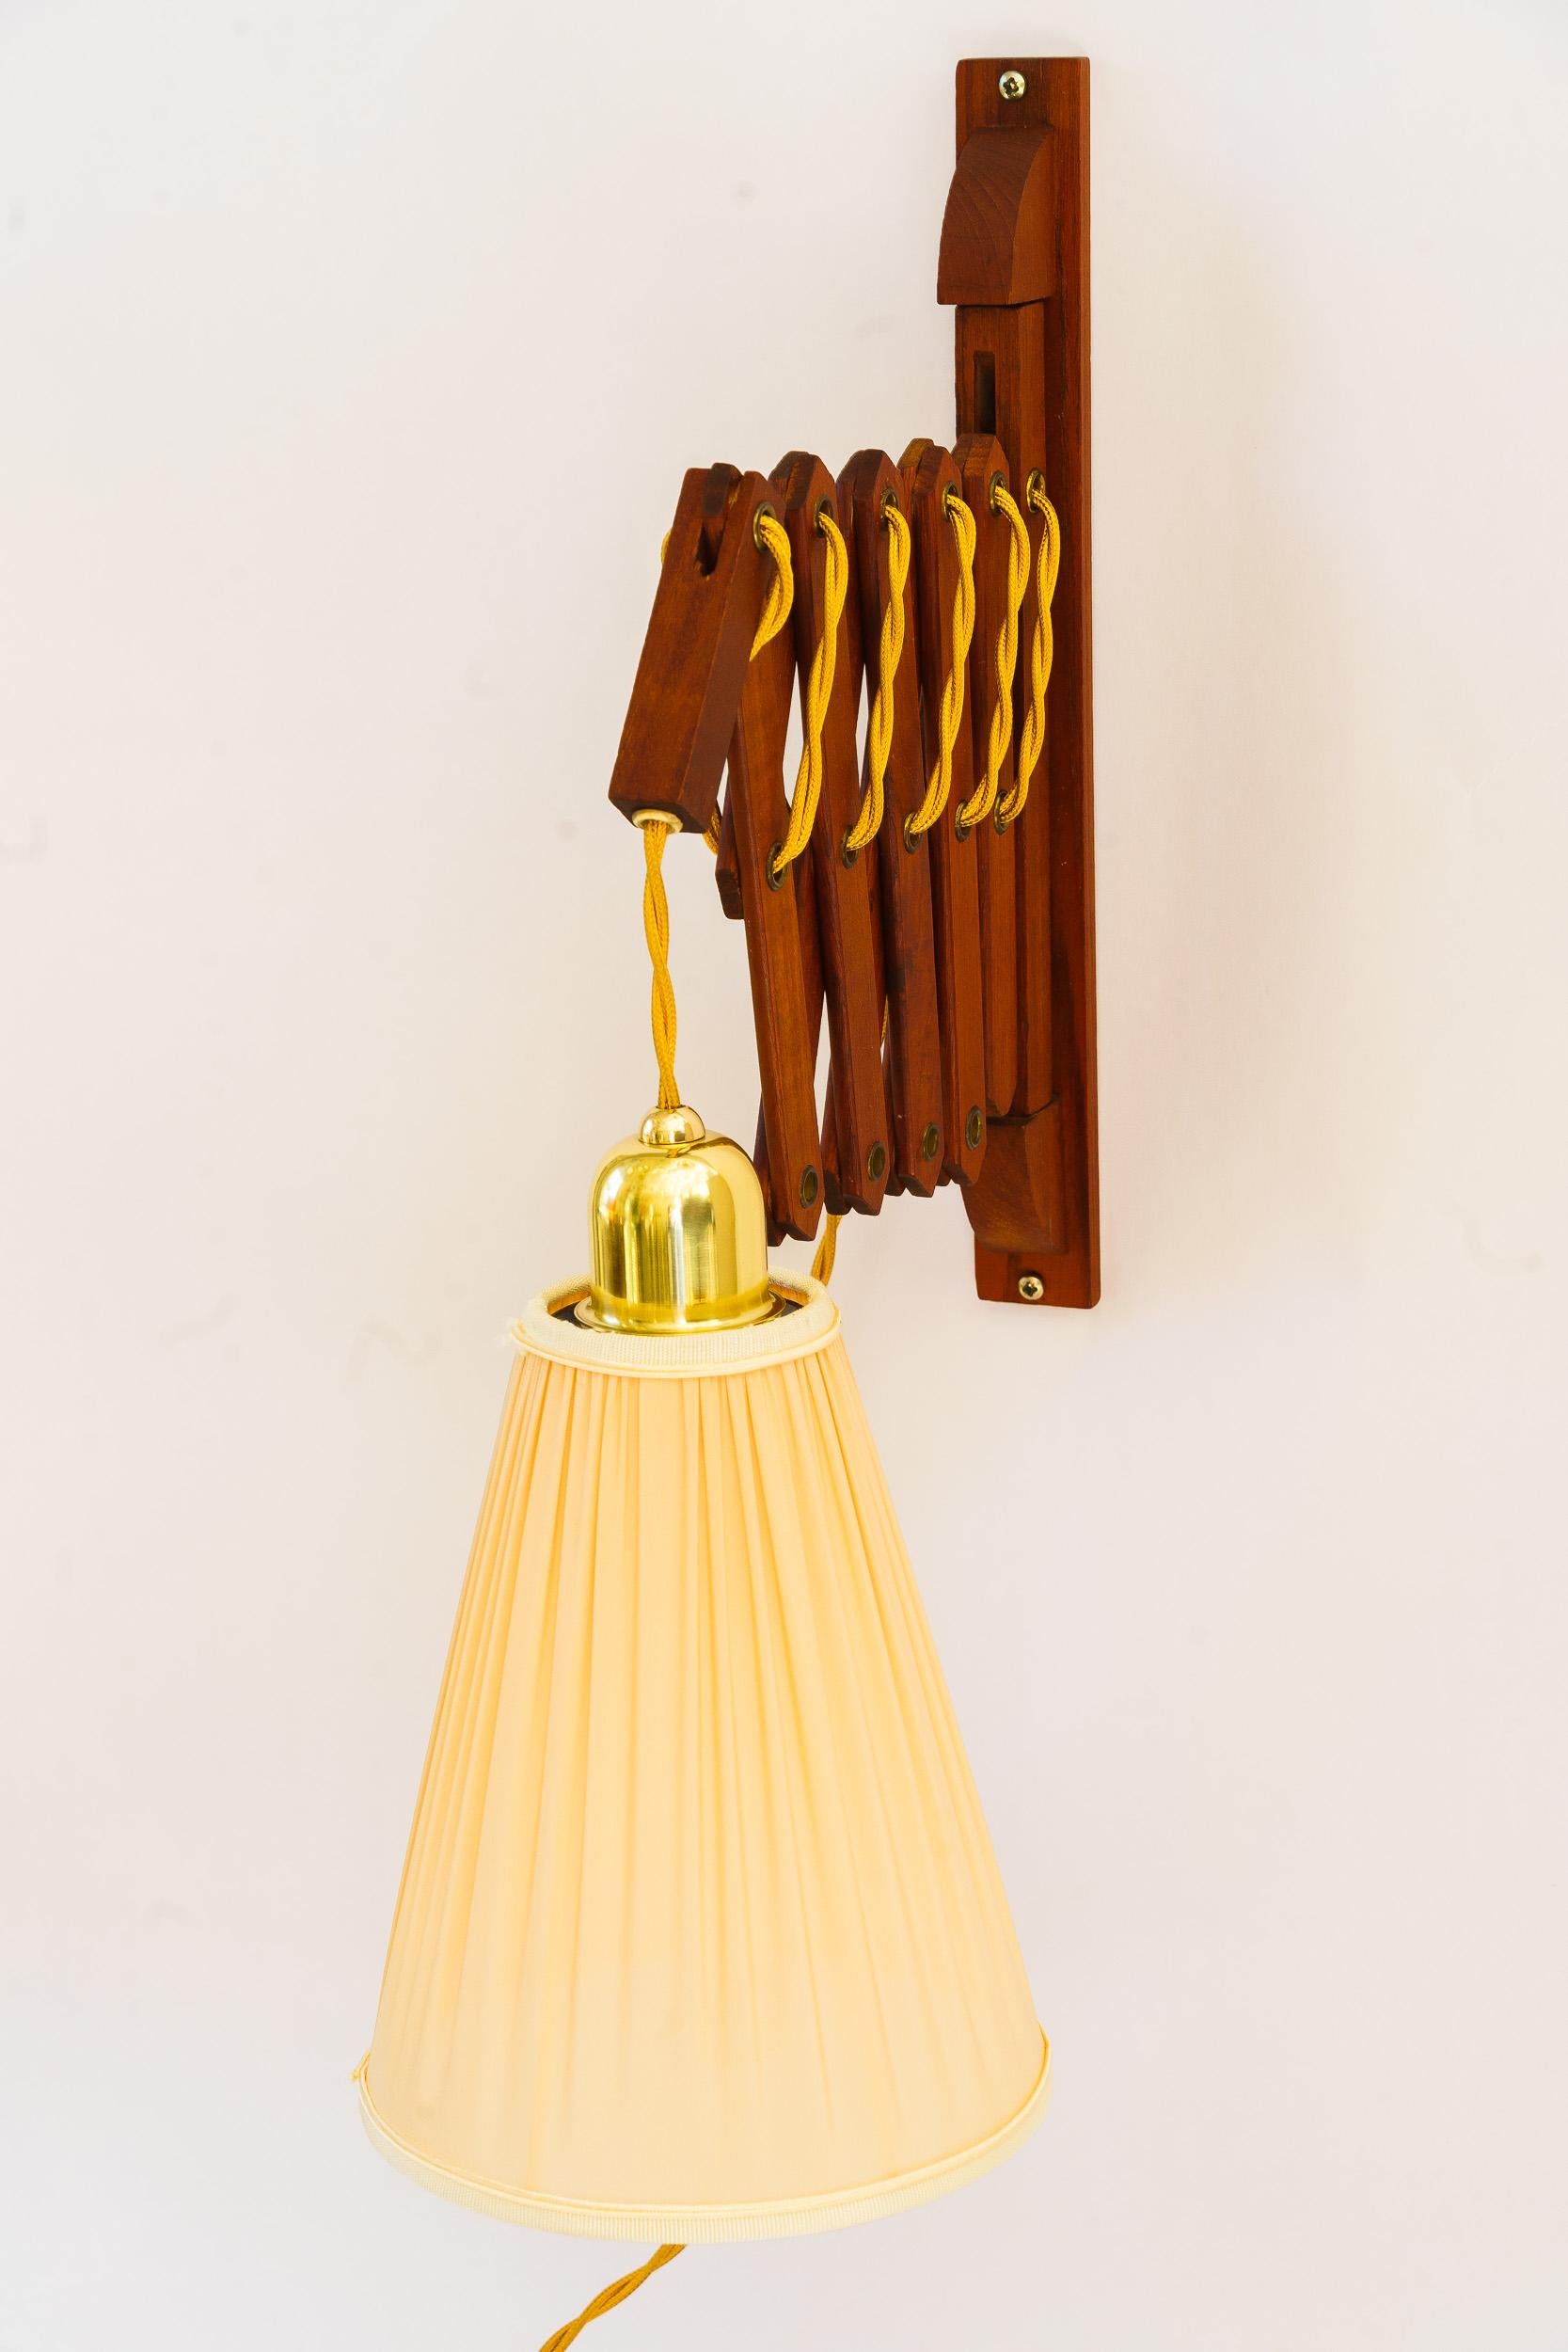 Adjustable teakwood wall lamp with fabric shade denmark around 1960s
The fabric shade is replaced ( new )
Teak wood original condition